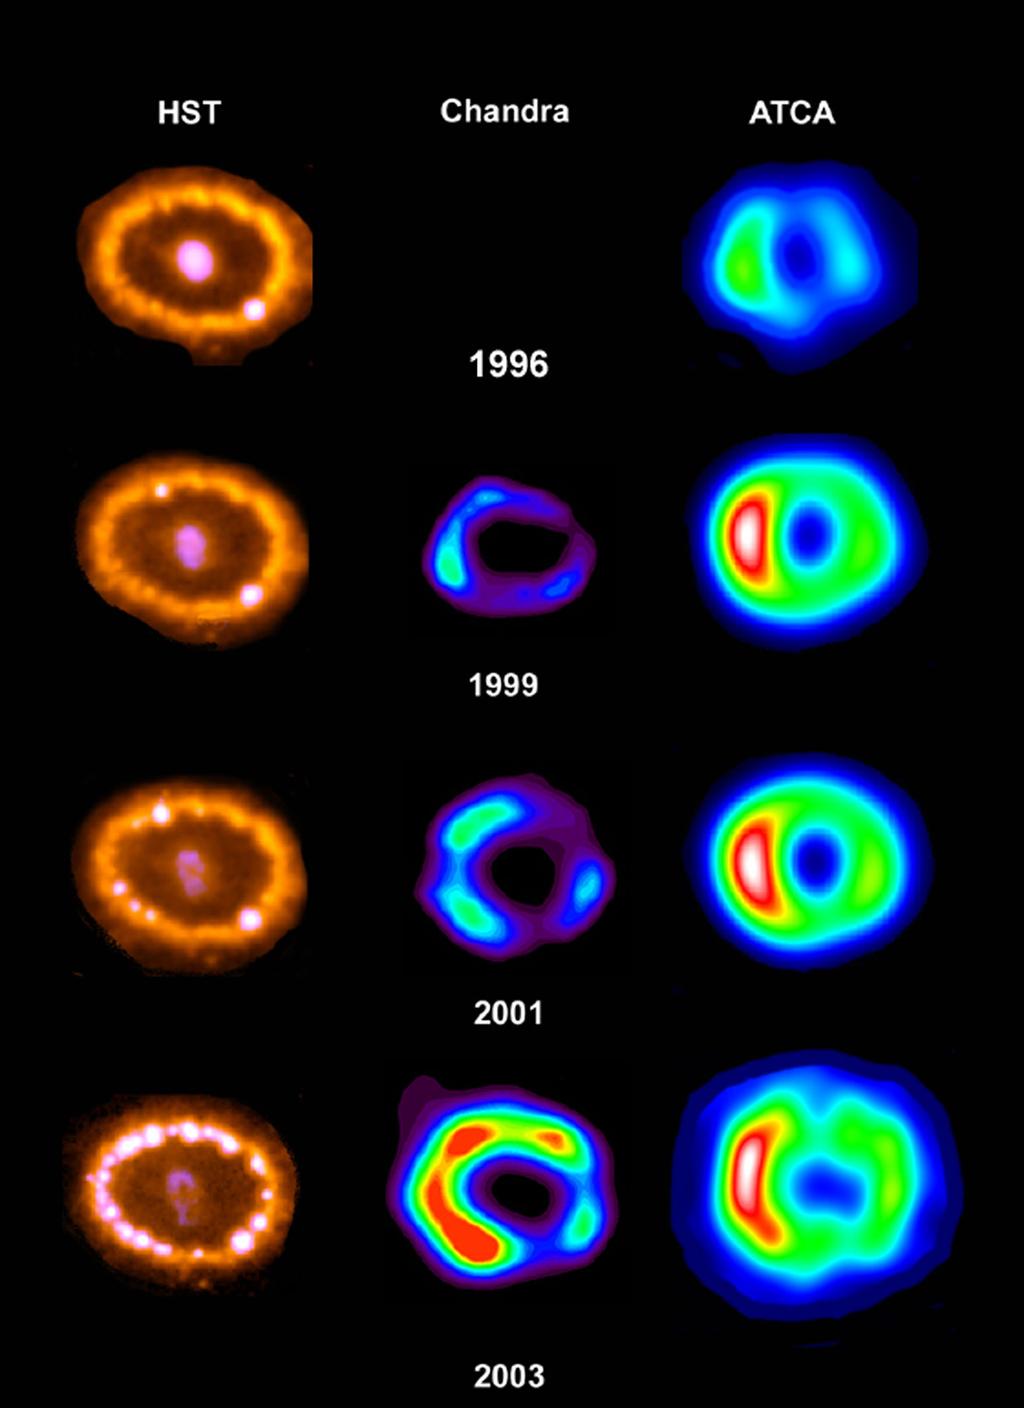 The evolution of SN 1987A has been observed